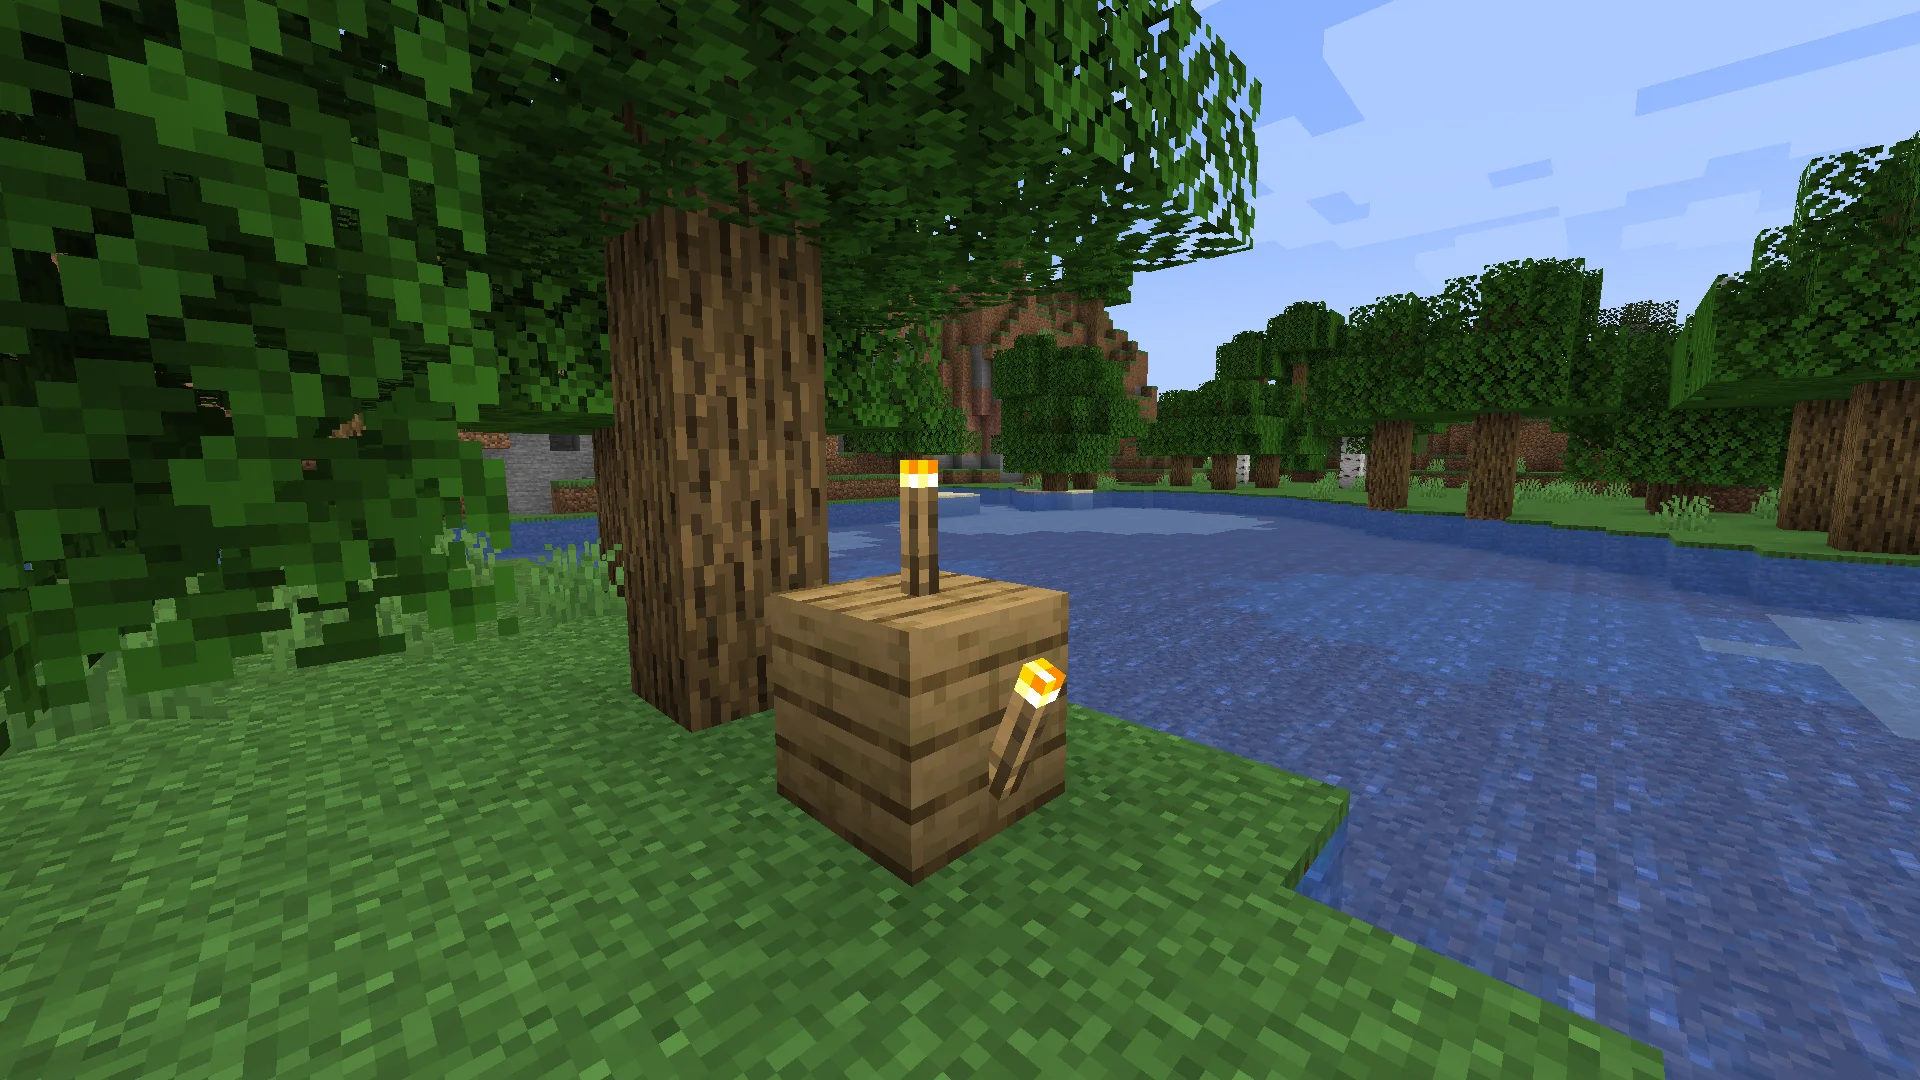 Minecraft crafting table near a lake